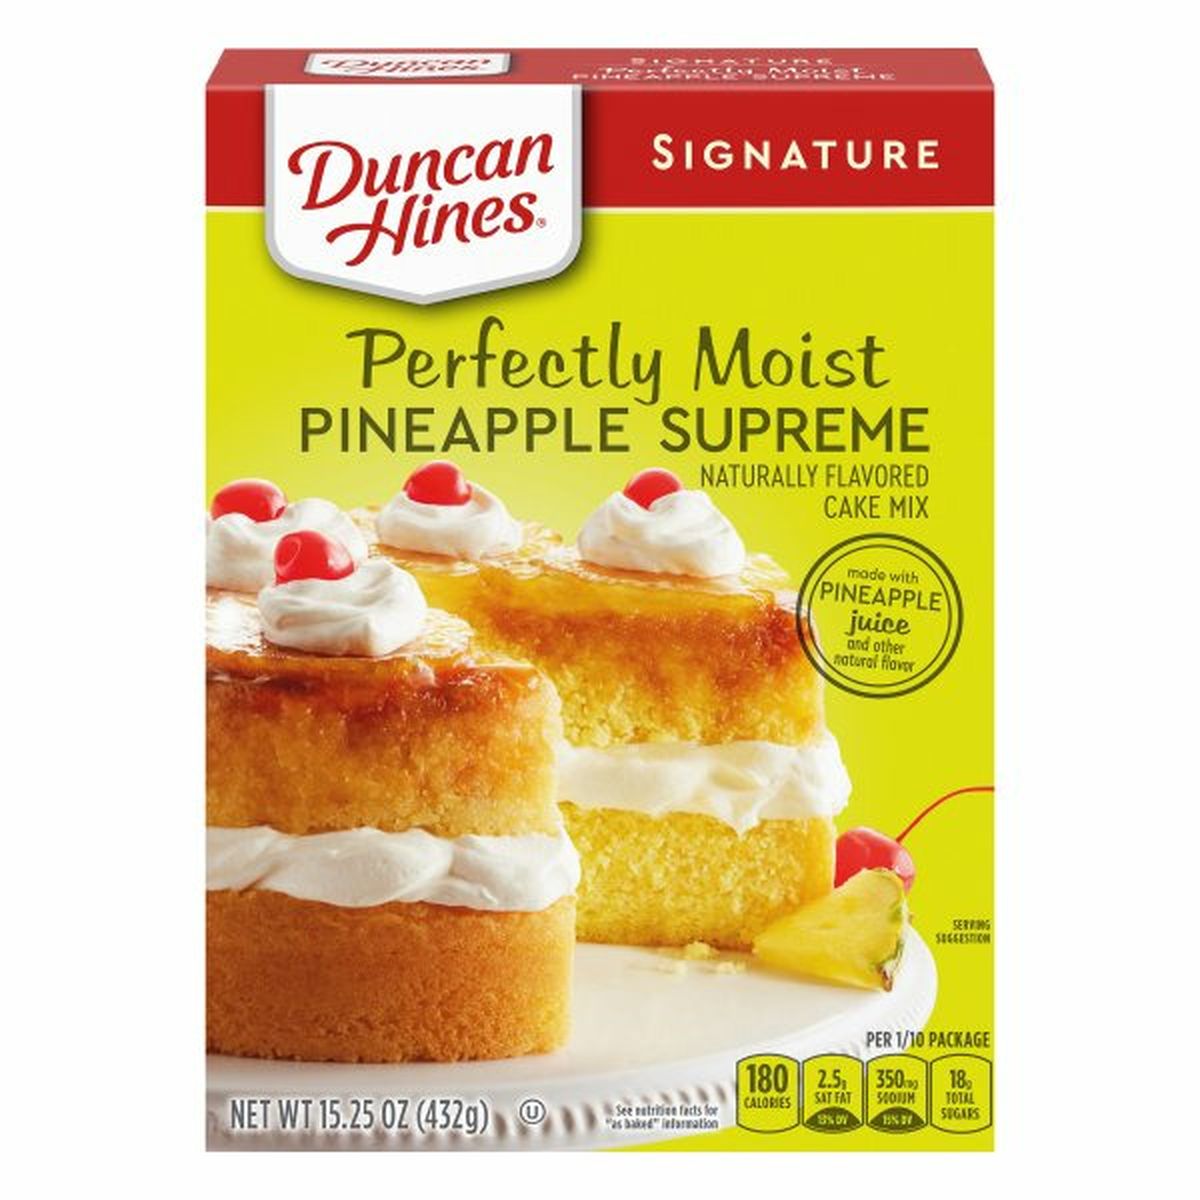 Calories in Duncan Hines Signature Cake Mix, Pineapple Supreme, Perfectly Moist